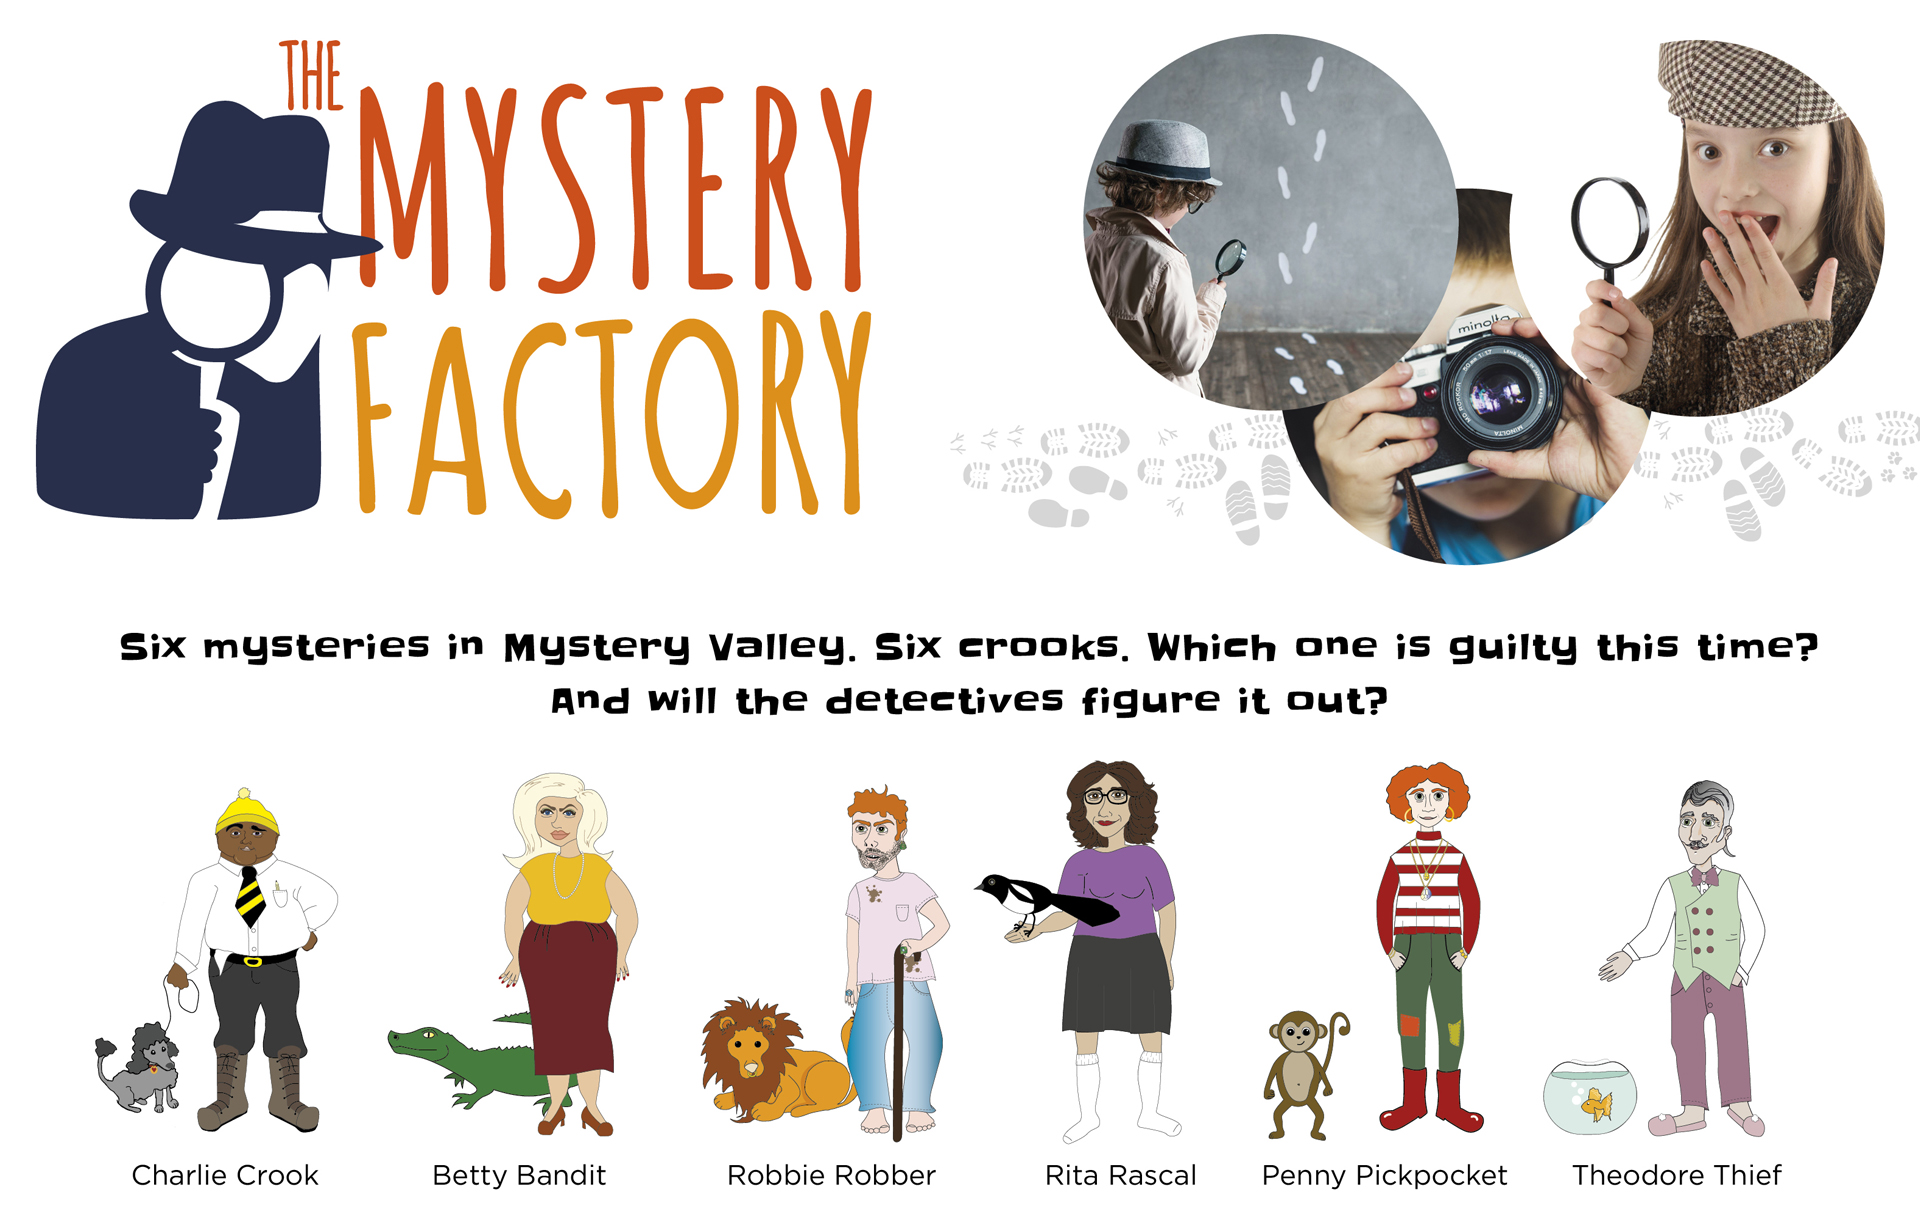 Mysteries for children from The Mystery Factory